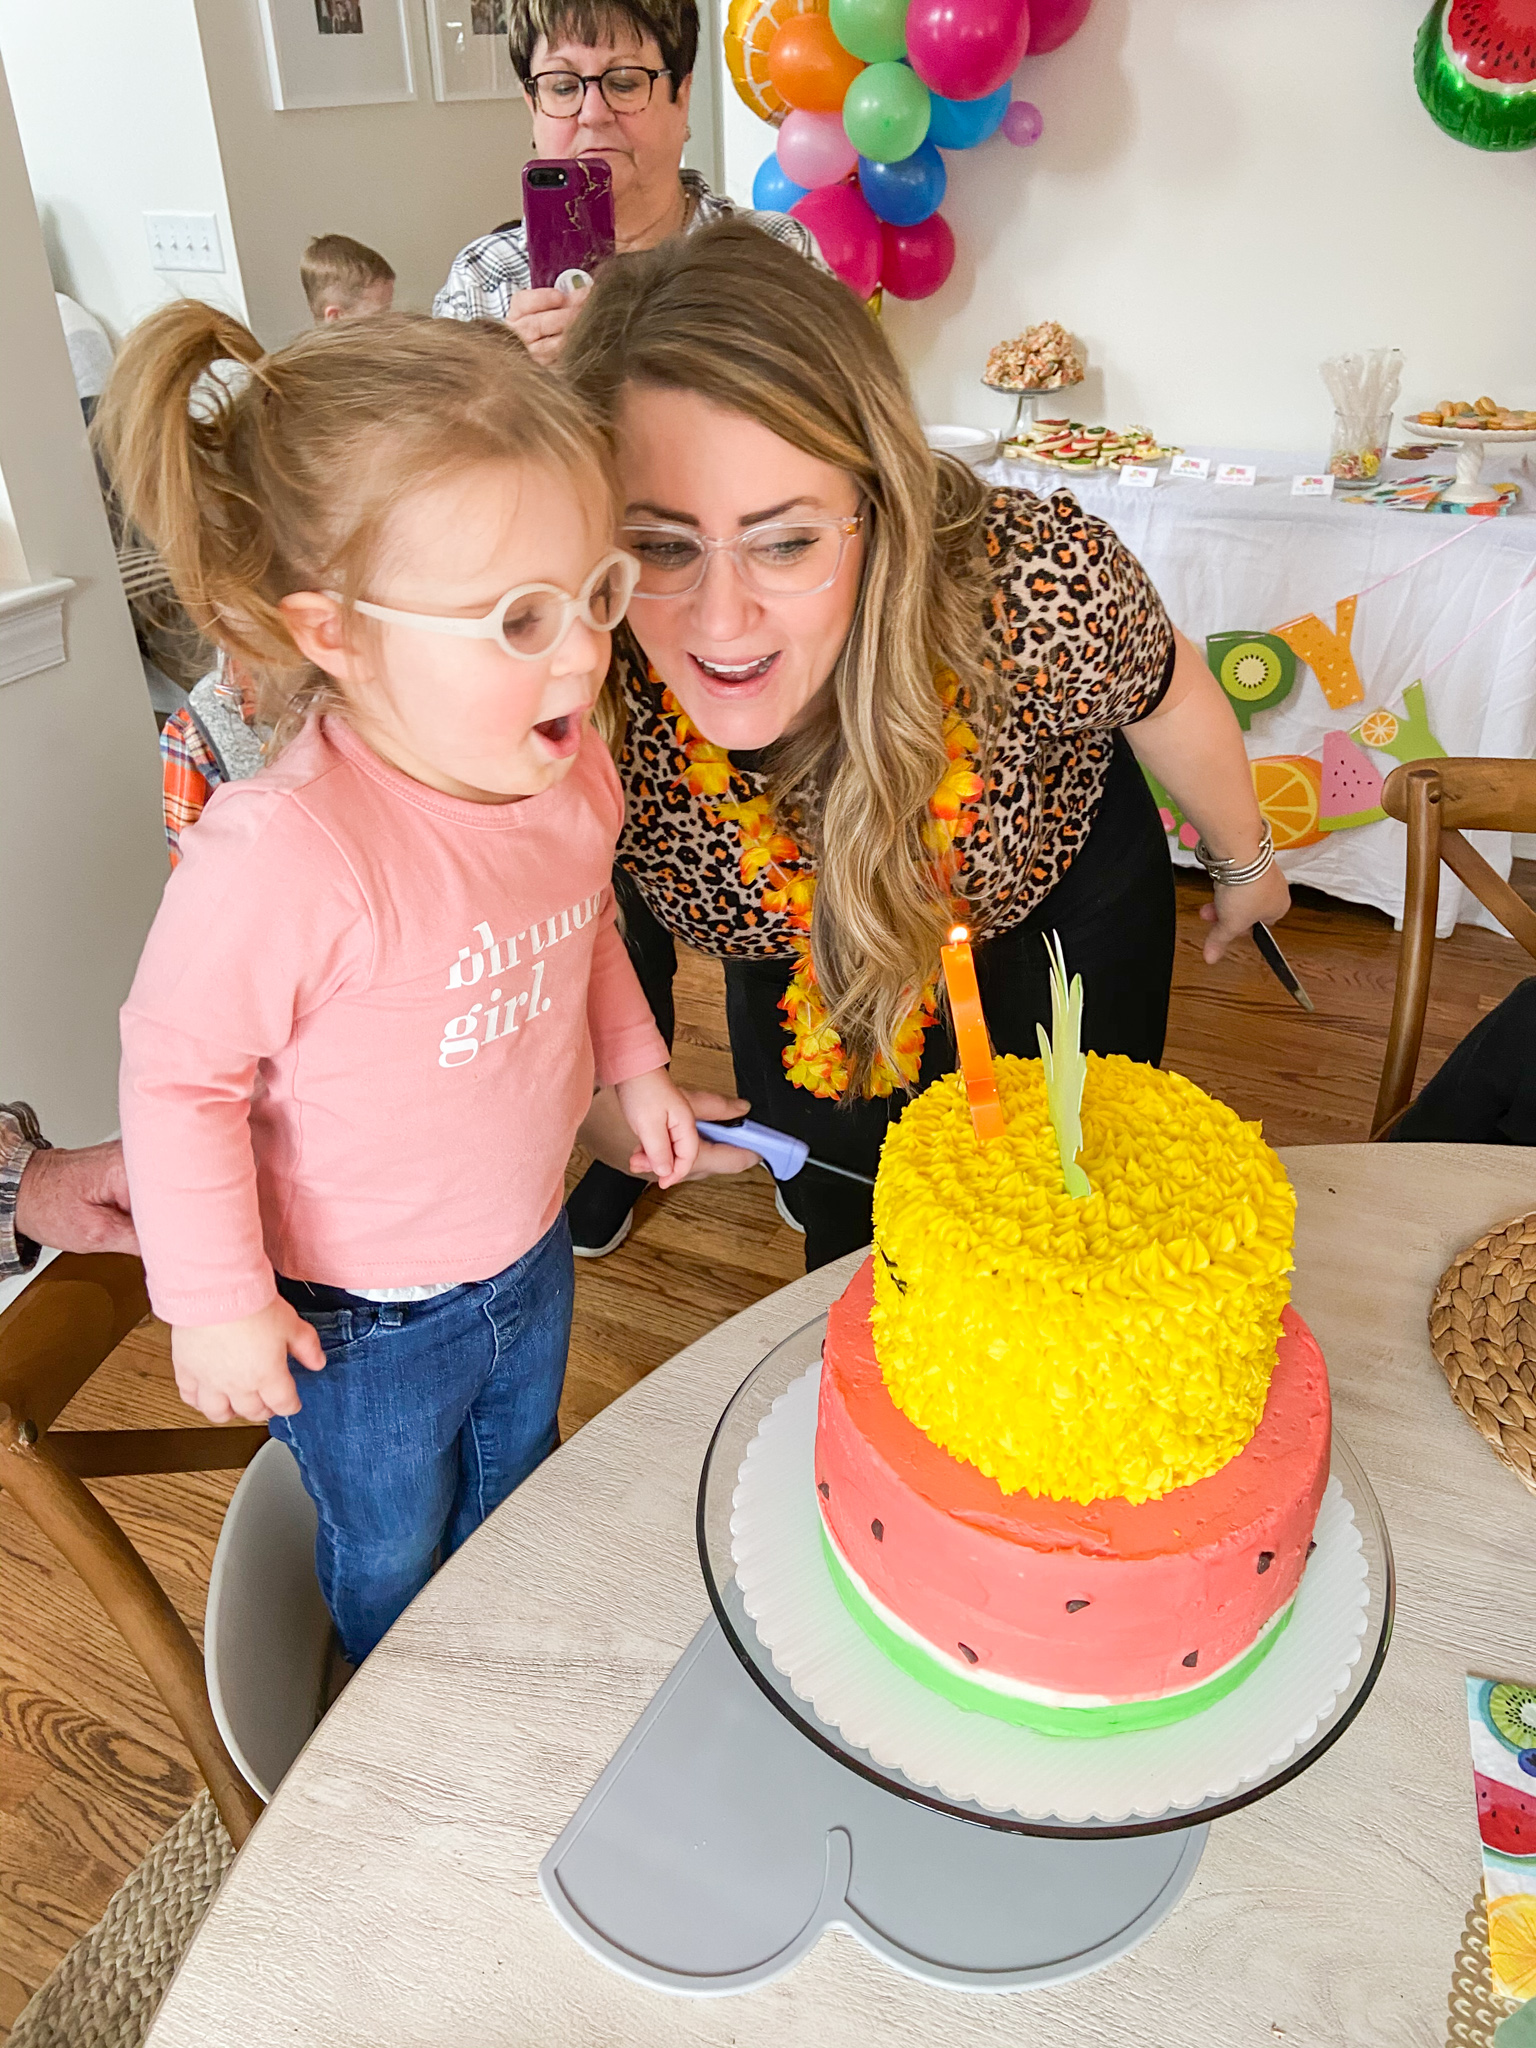 2nd Birthday Party Ideas by popular Ohio lifestyle blog, Coffee Beans and Bobby Pins: image of a mom standing next to her two year old daughter and helping her blow out a number 2 candle on her 2 tier pineapple and watermelon decorated cake.